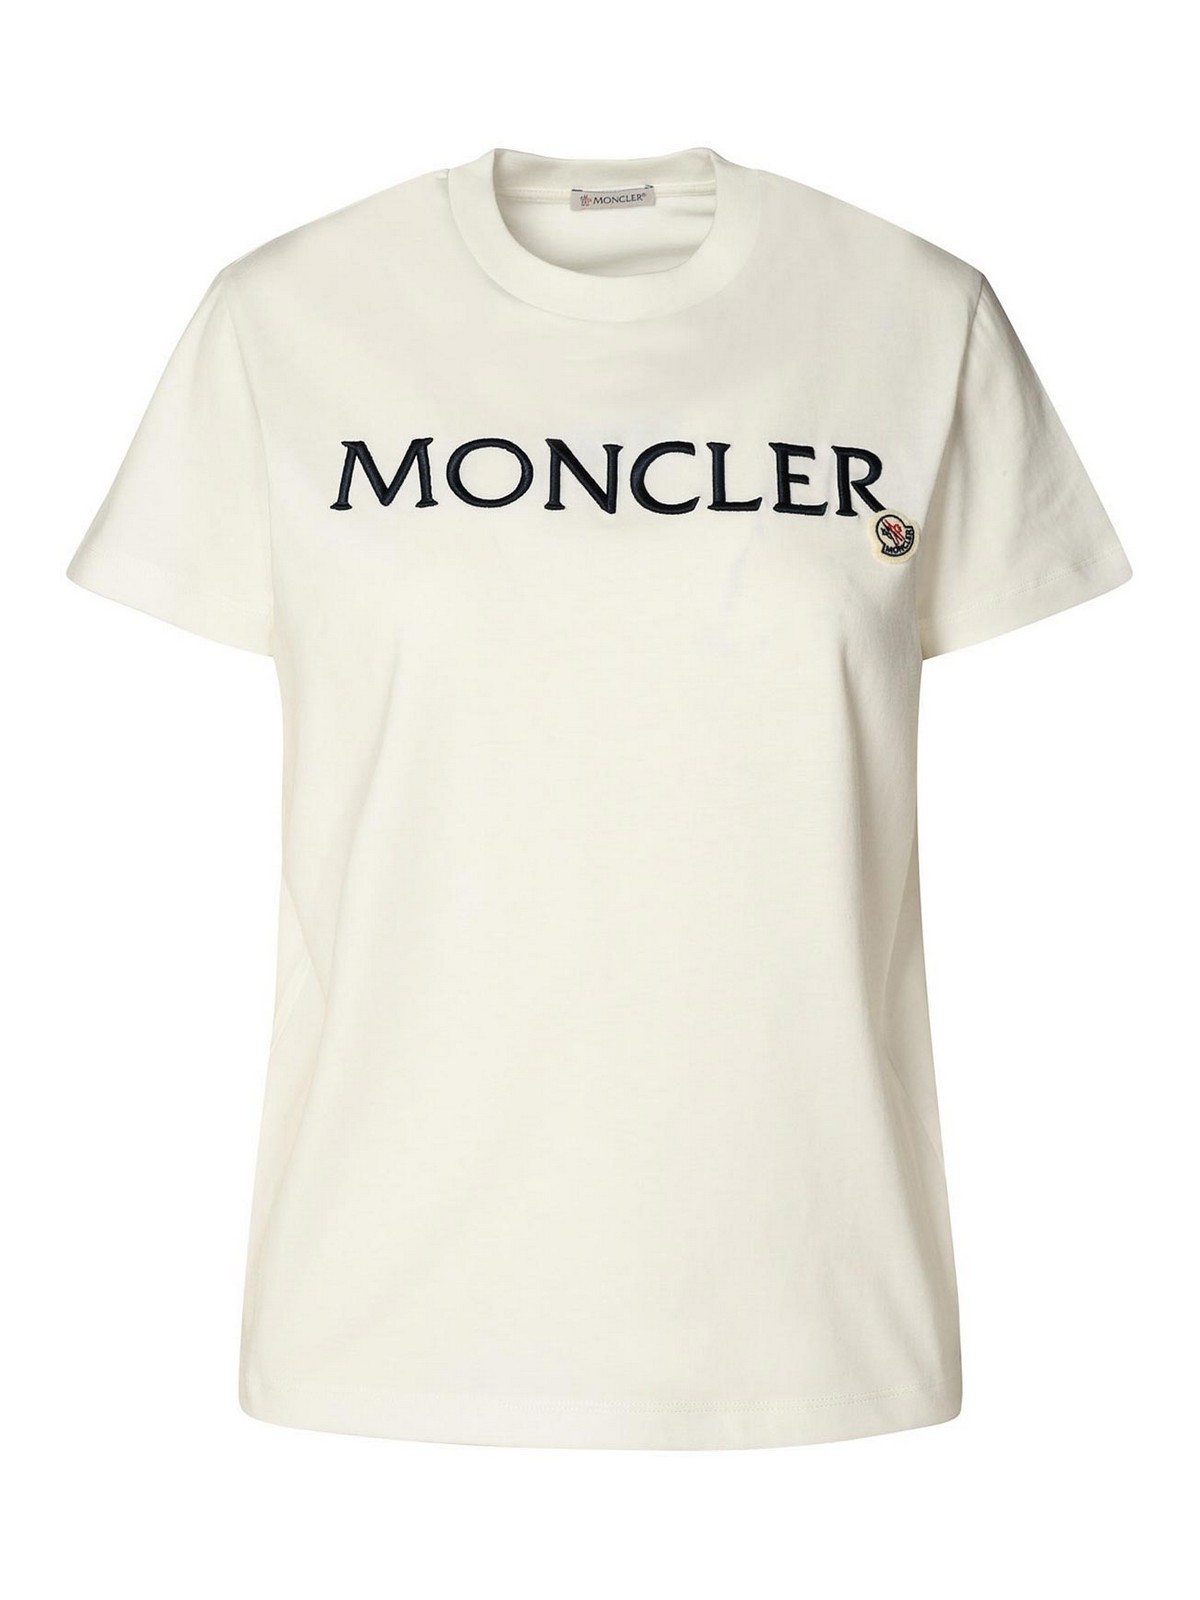 Tシャツ Moncler - Tシャツ - 白 - 8C00006829HP037 | THEBS